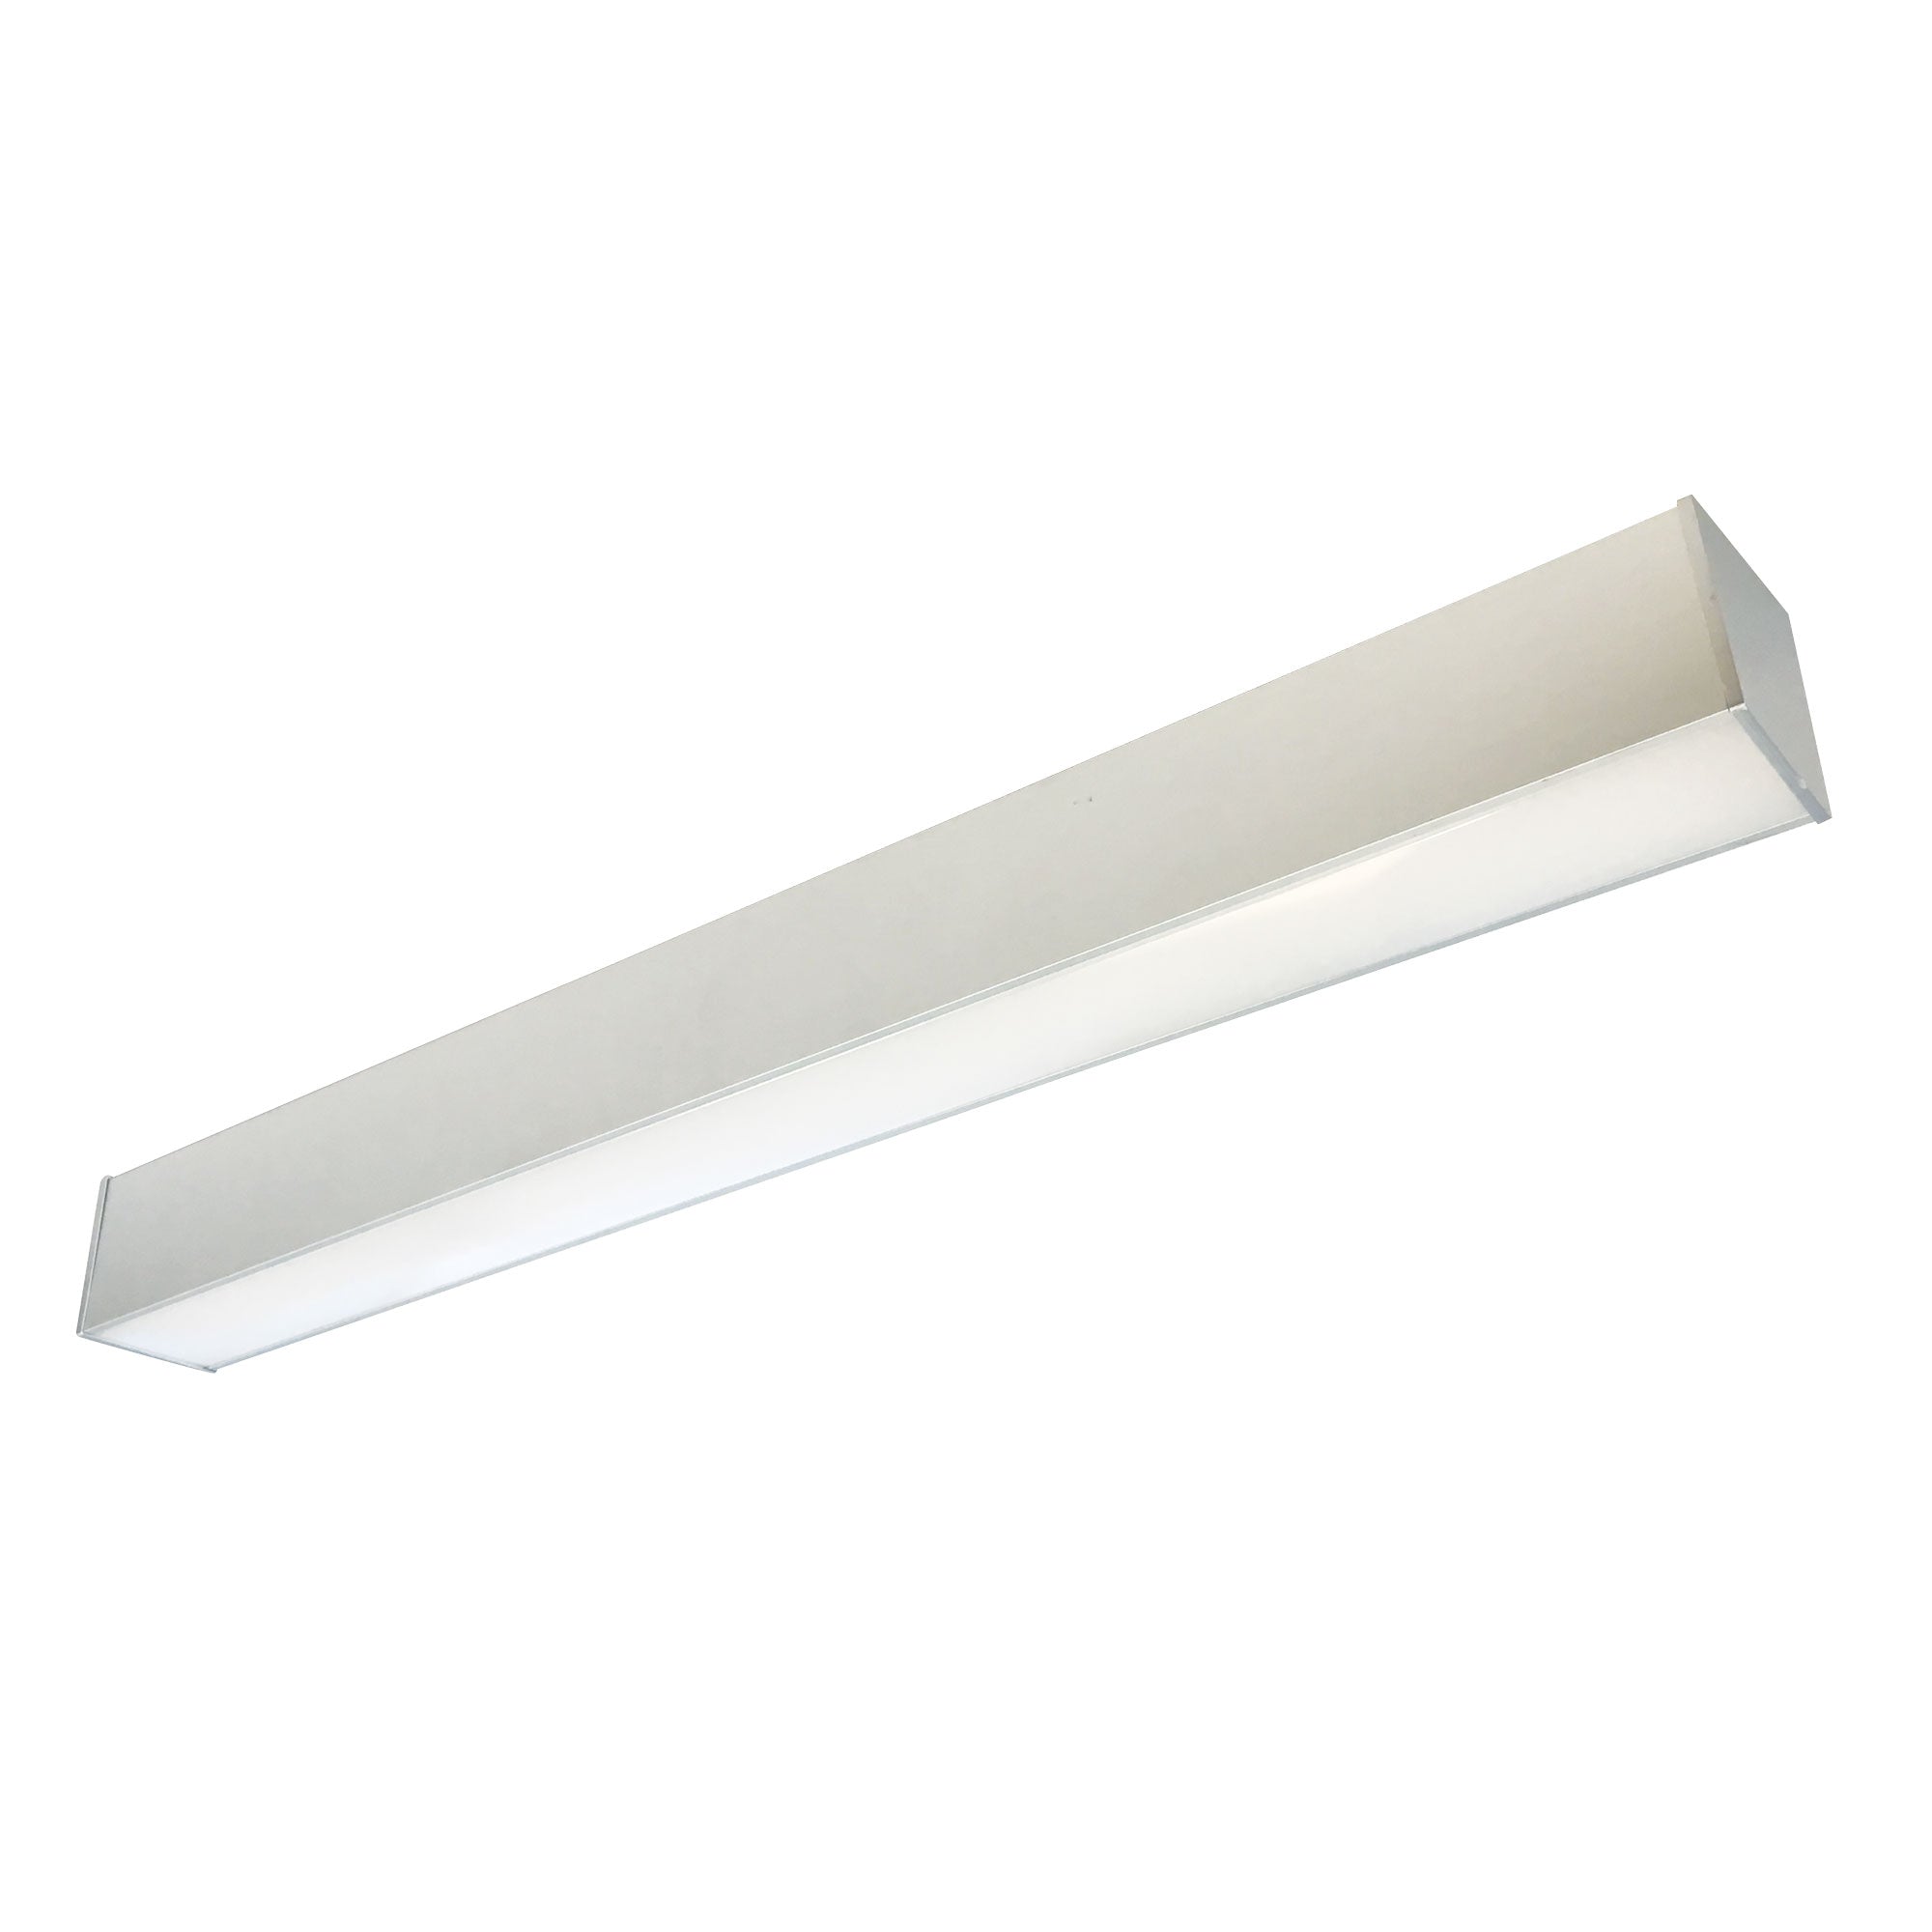 Nora Lighting NLIN-41030A - Linear - 4' L-Line LED Direct Linear w/ Dedicated CCT, 4200lm / 3000K, Aluminum Finish